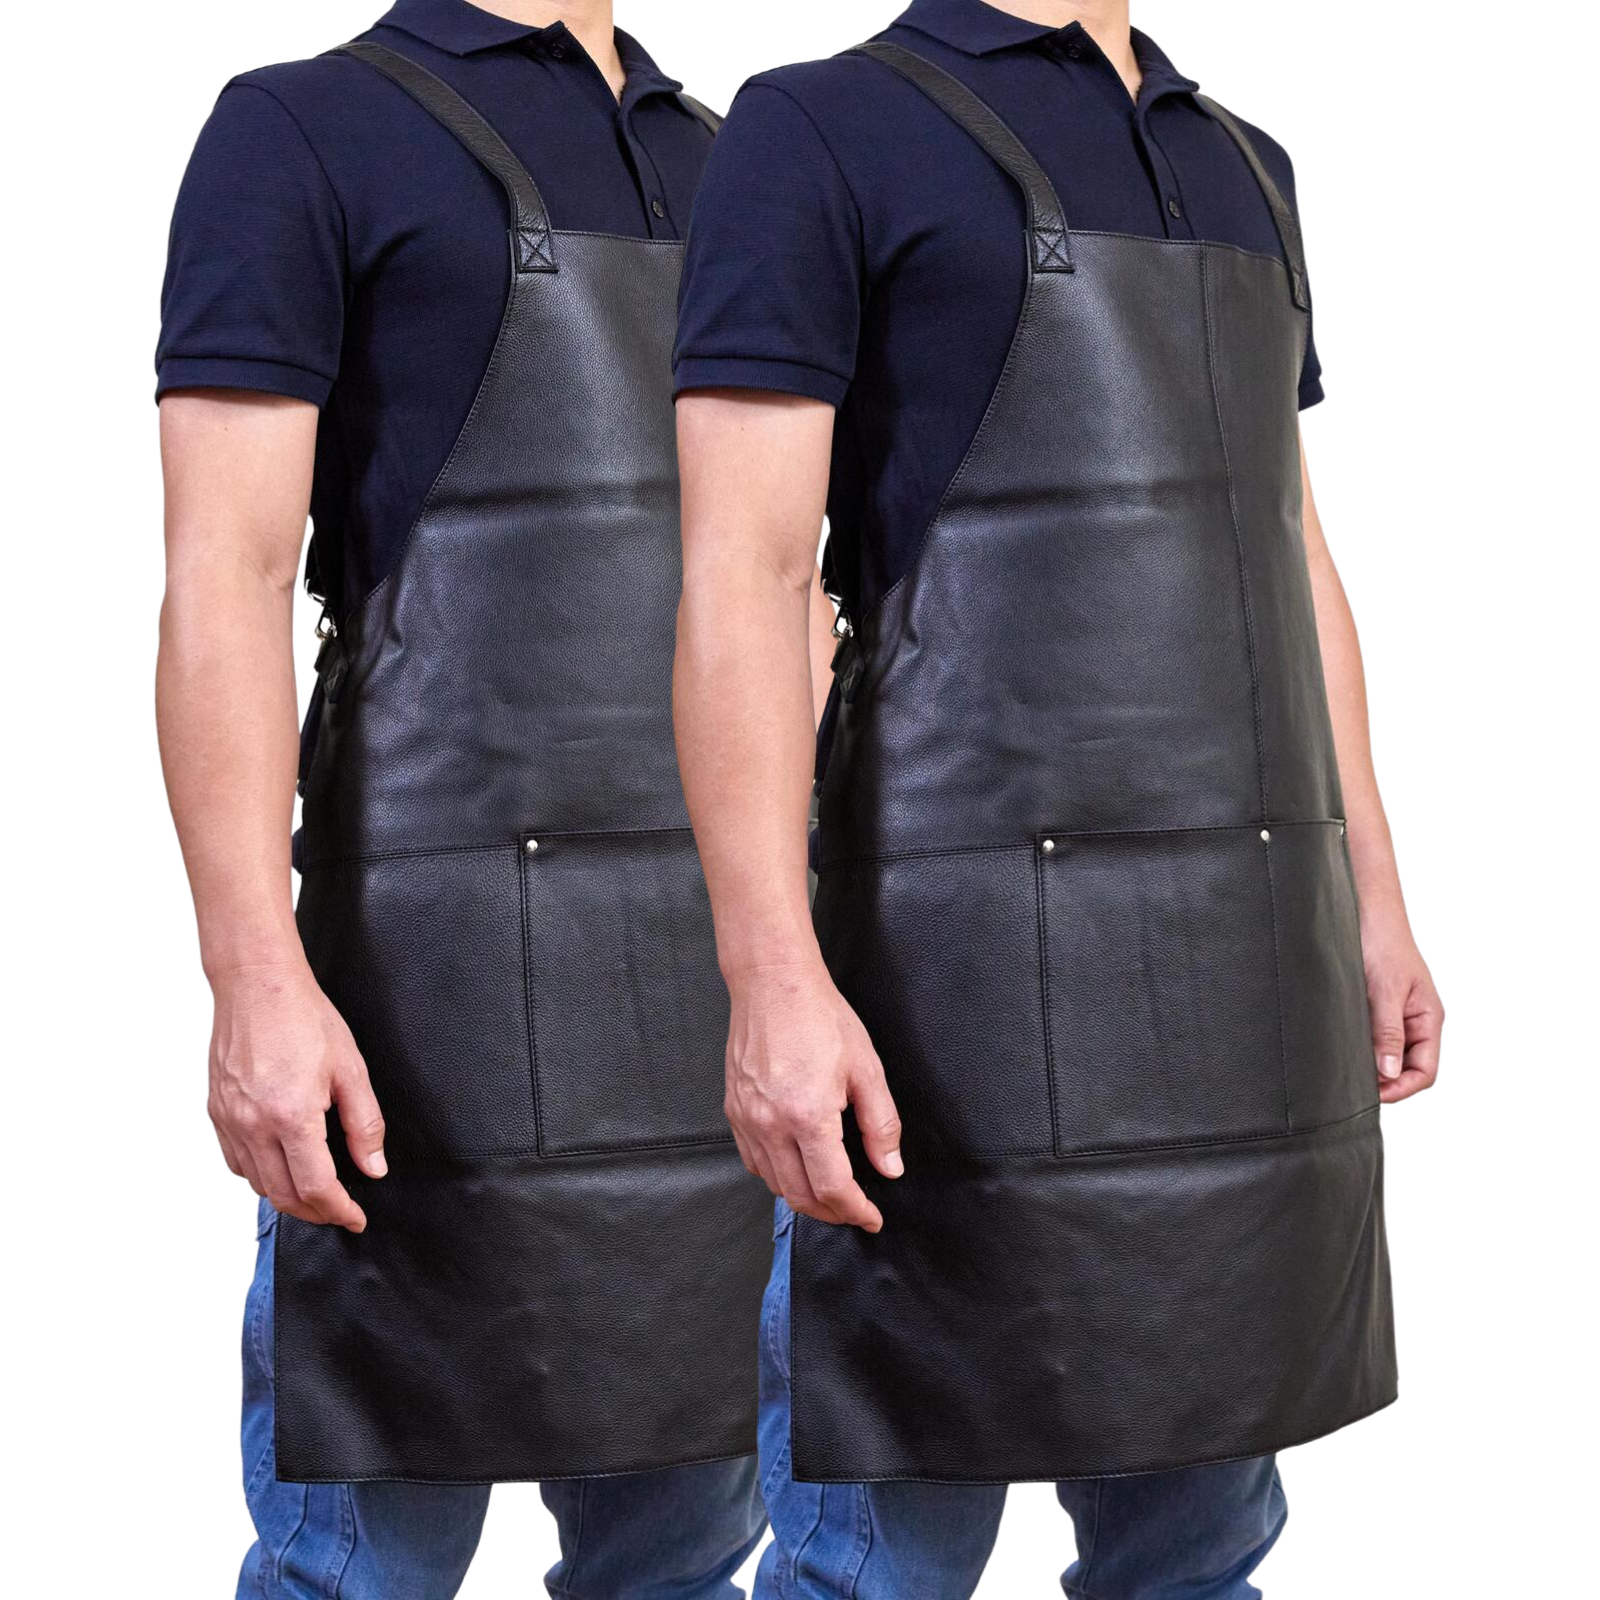 2x  Professional Leather Apron Butcher Woodwork Barber Chef - Black